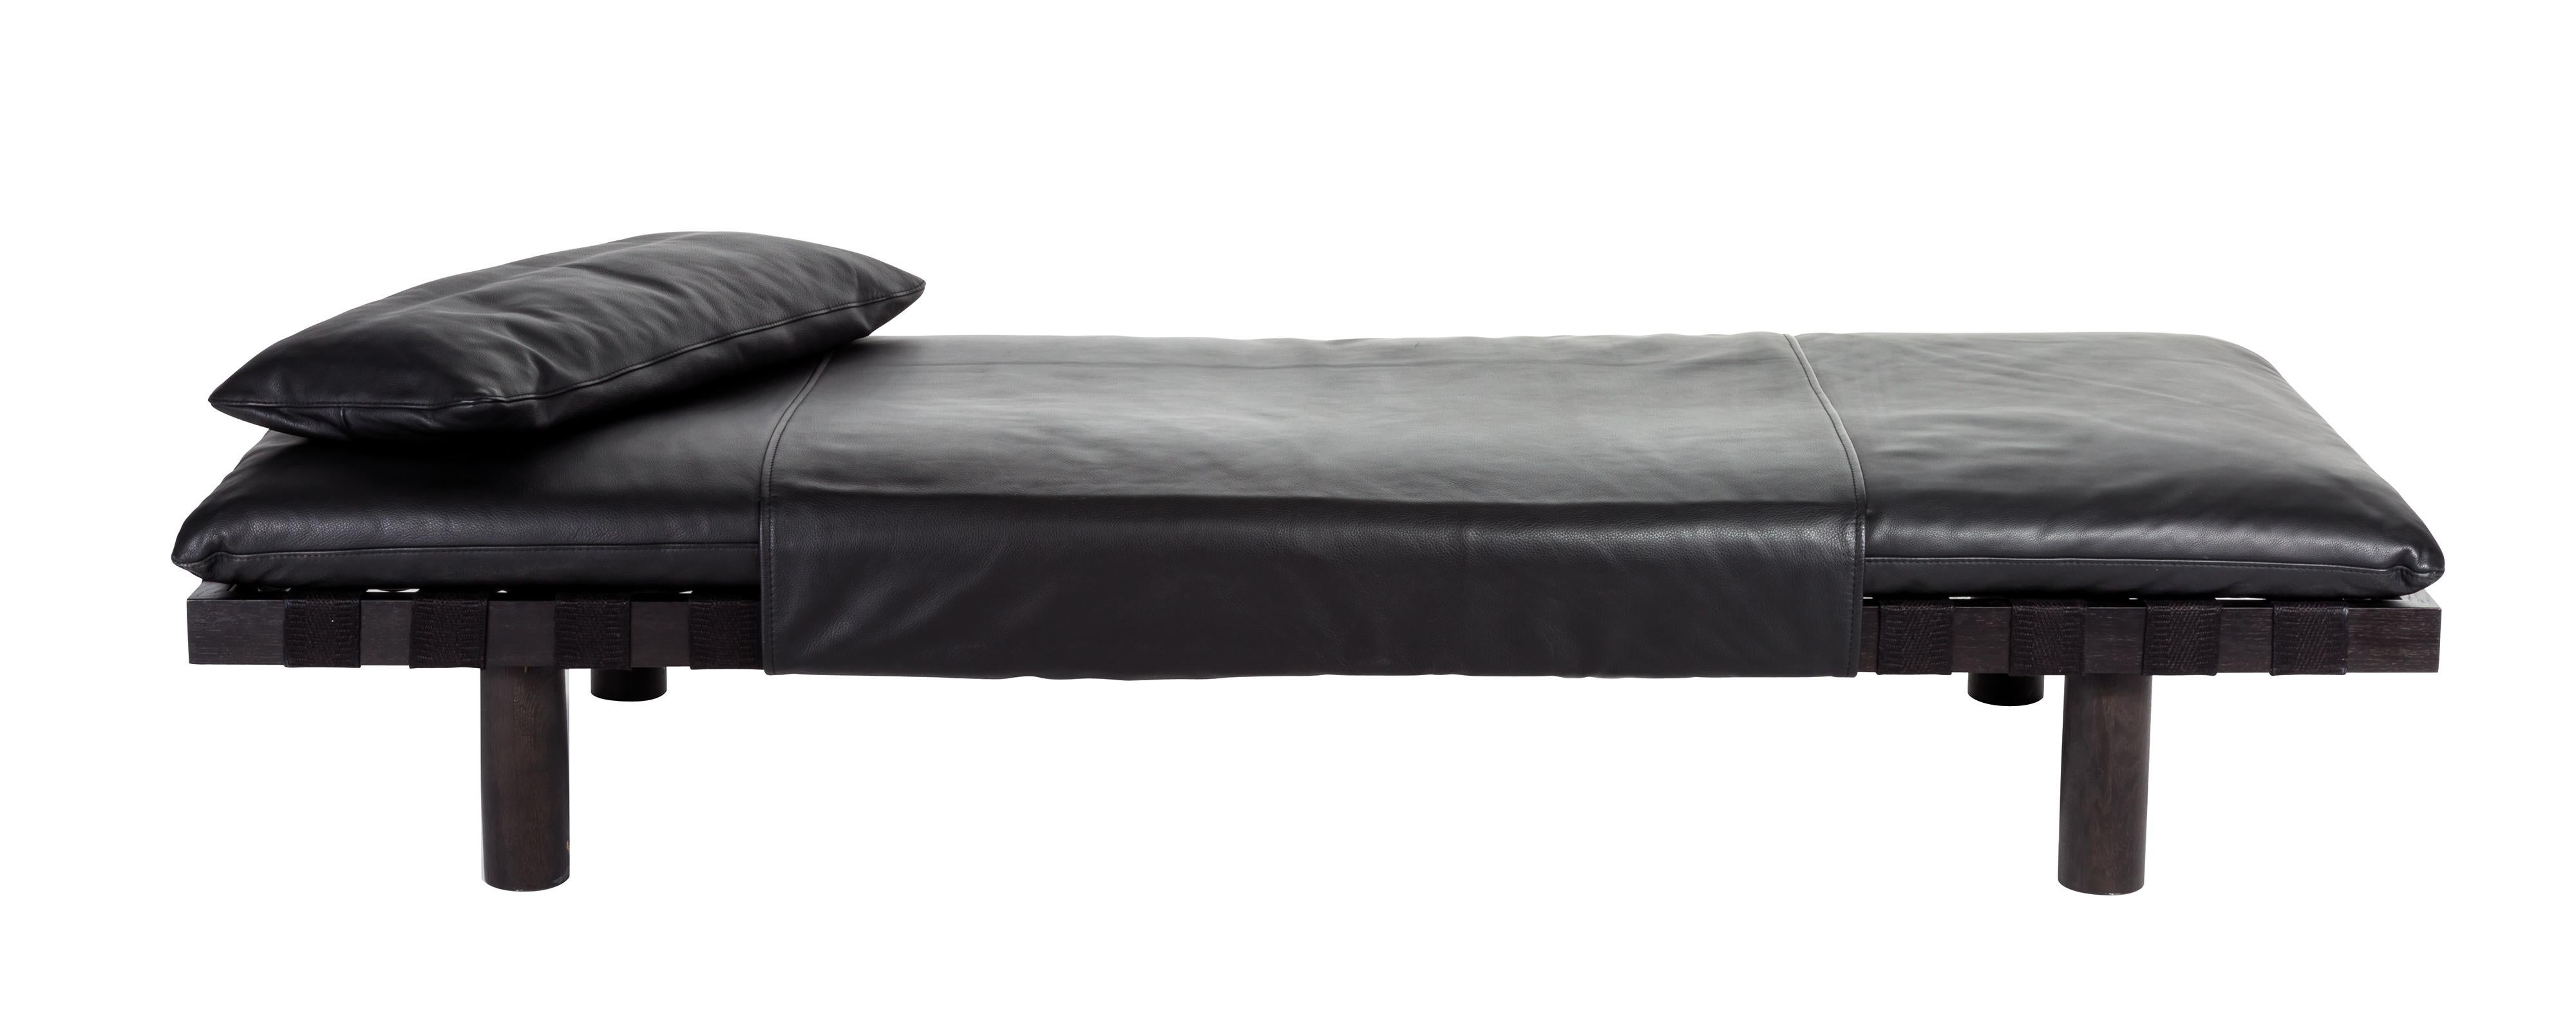 German Pallet Terracotta Leather Black Day Bed by Pulpo For Sale